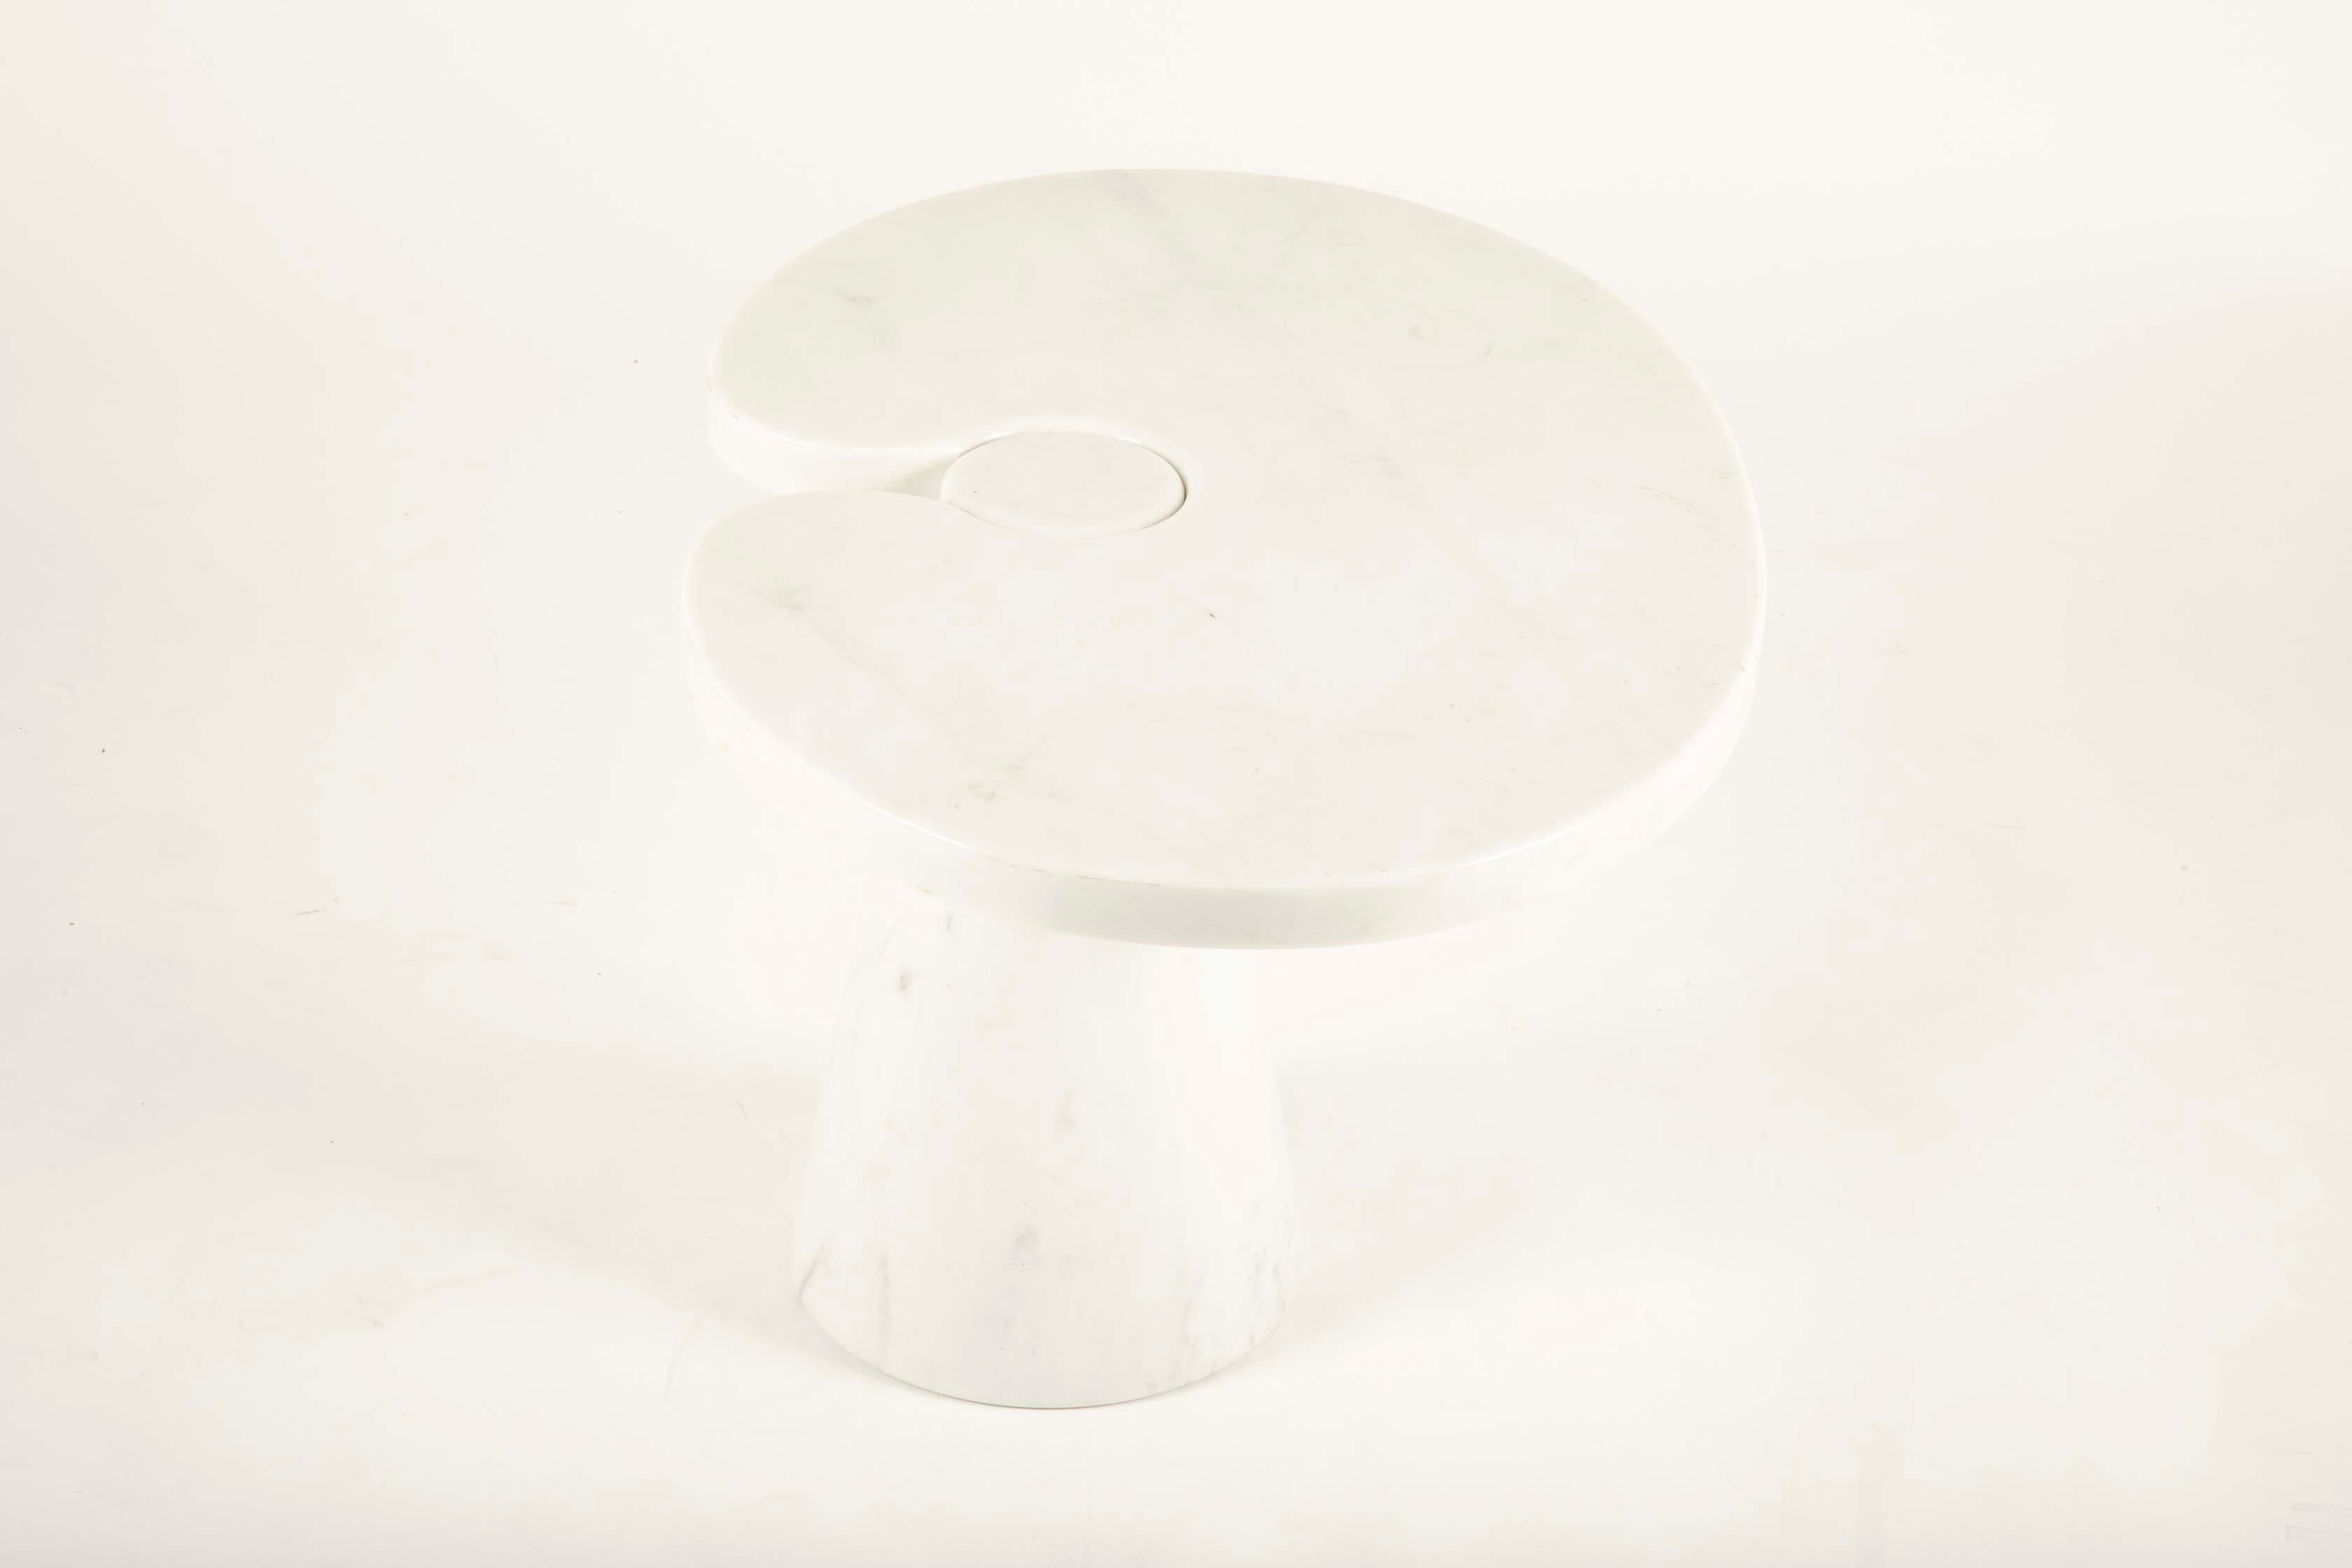 Pair of Angelo Mangiarotti Carrara Side Tables for Skipper Sold Individually 1